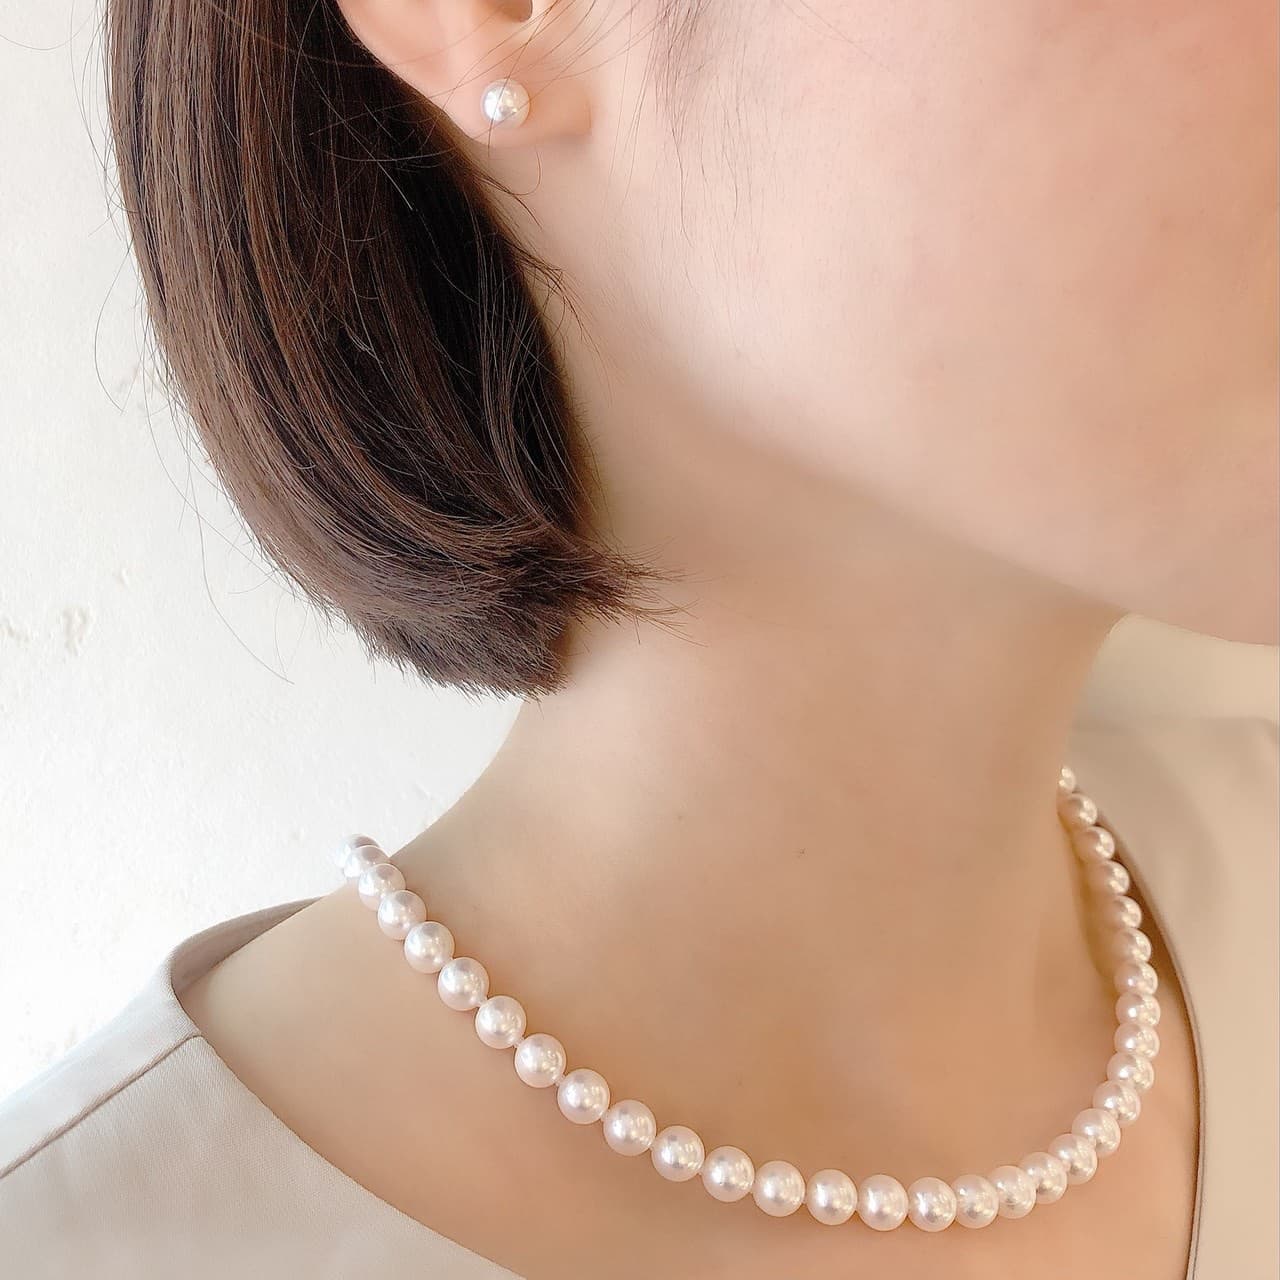 Akoya pearl necklace & pearl earrings set【M】/アコヤ真珠ネックレス＆イヤリングセット Mサイズ-2